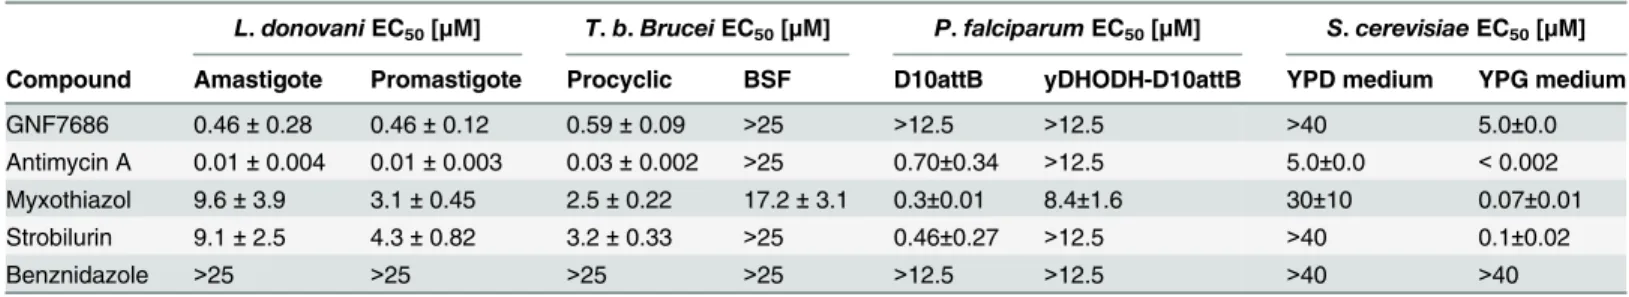 Table 2. Potency of GNF7686 and prototypic cytochrome b inhibitors in L. donovani, T. brucei, P